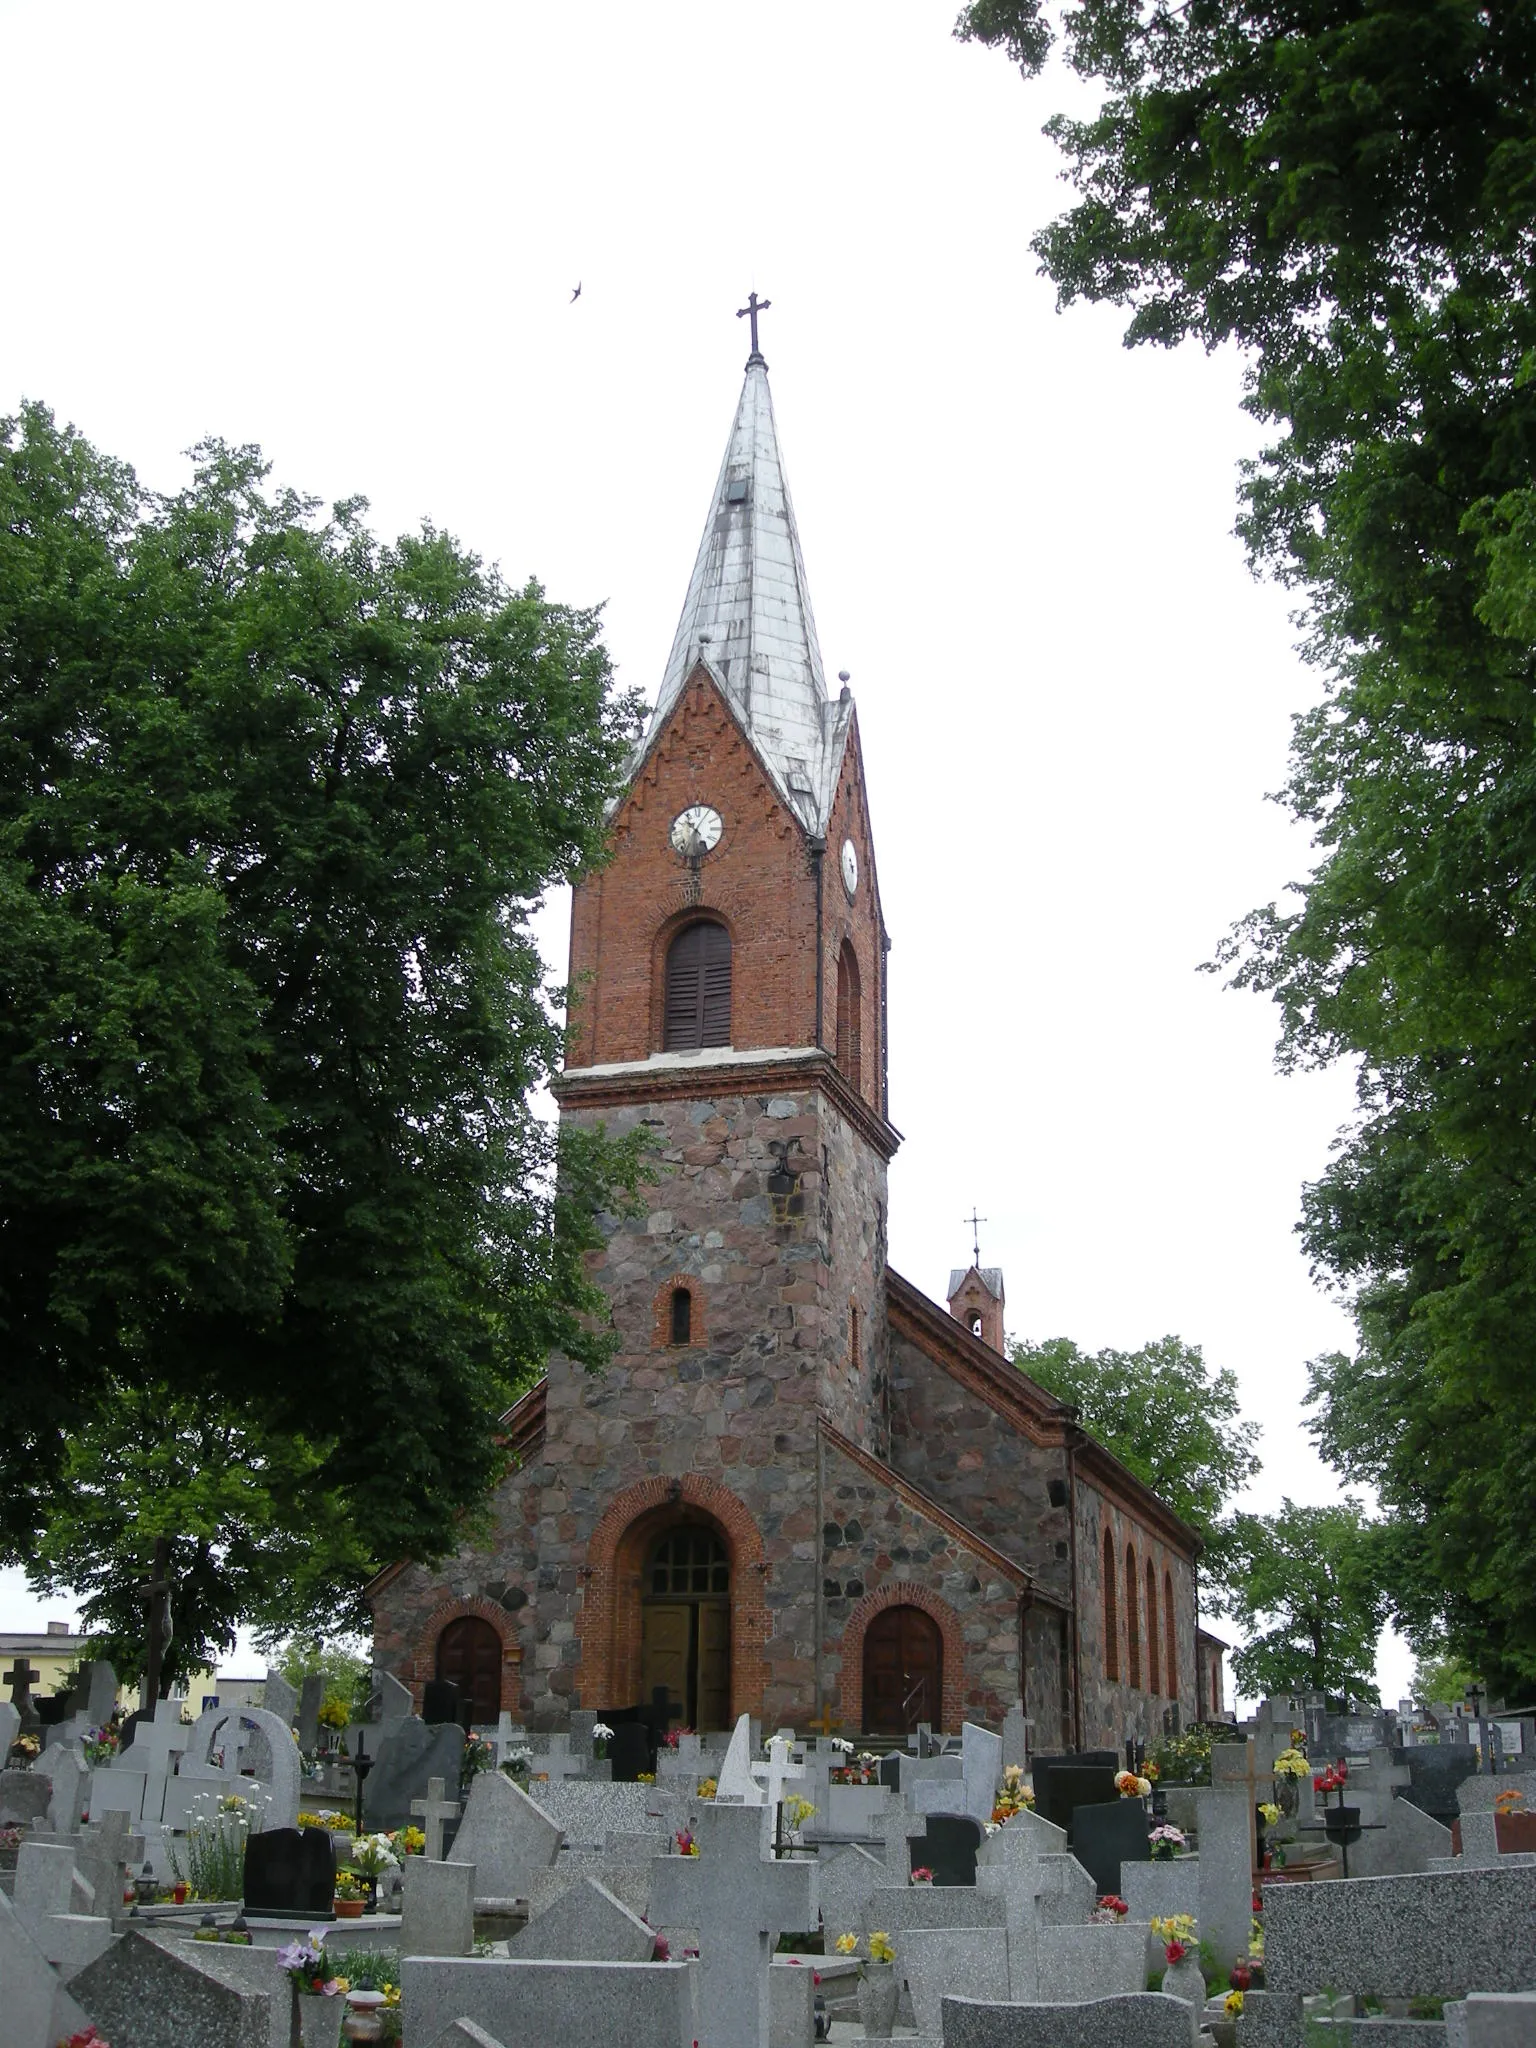 Photo showing: The church in Lubiewo, Poland.